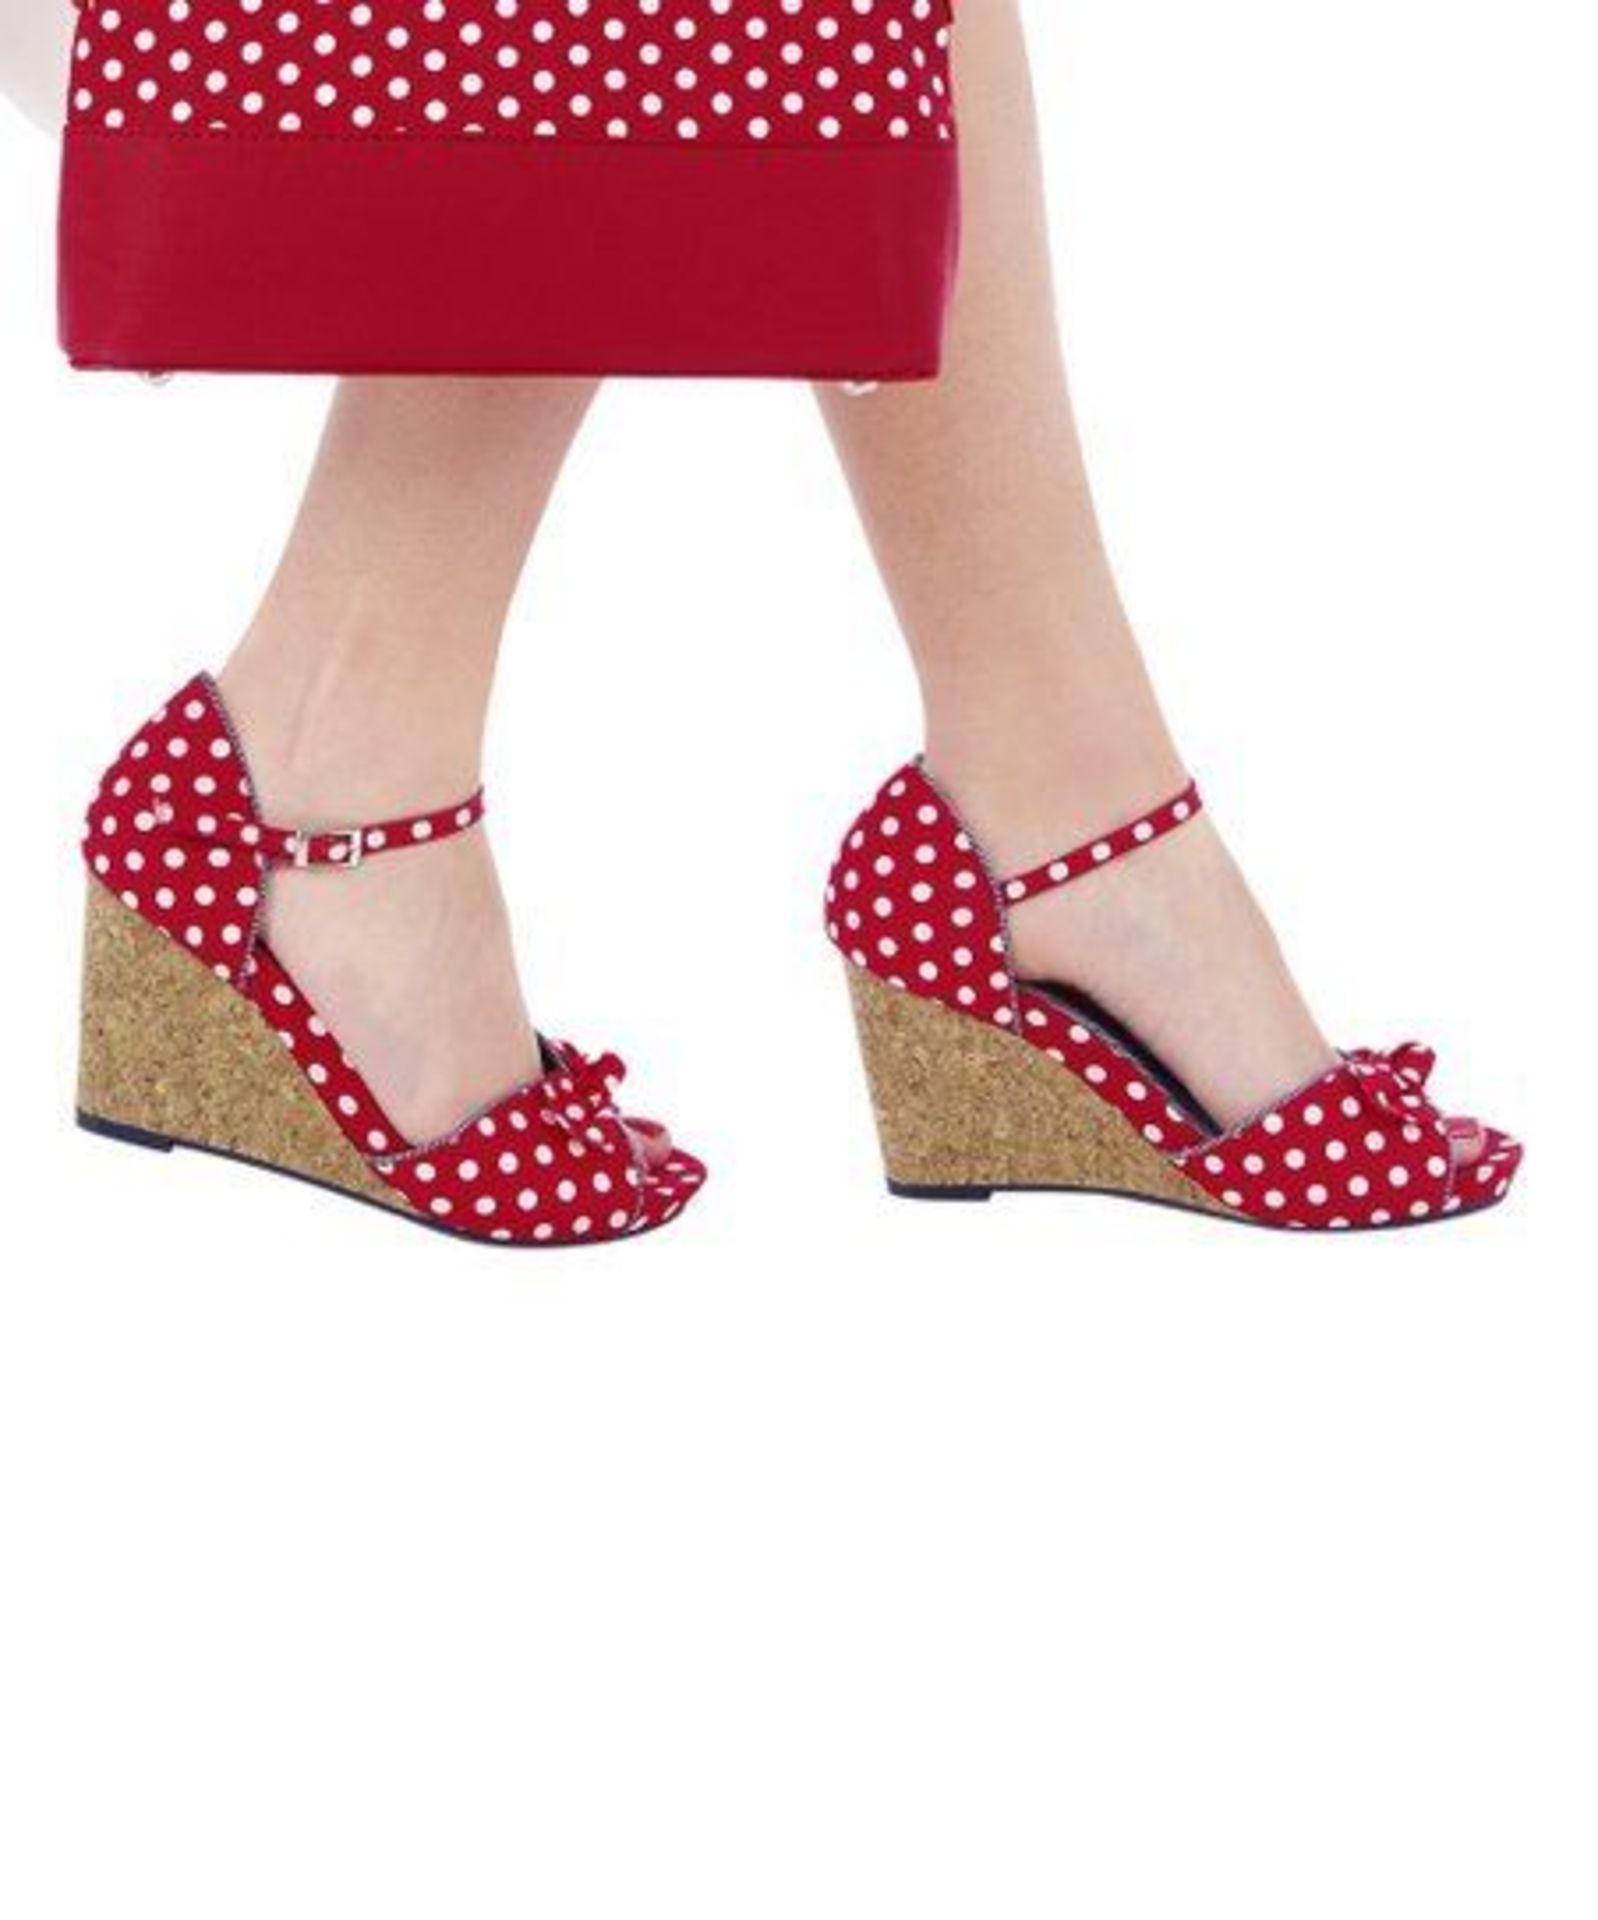 Ruby Shoo Red Polka Dot Molly Wedge Sandal (Uk Size:4/Euro Size:37) (New With Box) [Ref: 49603457- - Image 4 of 4